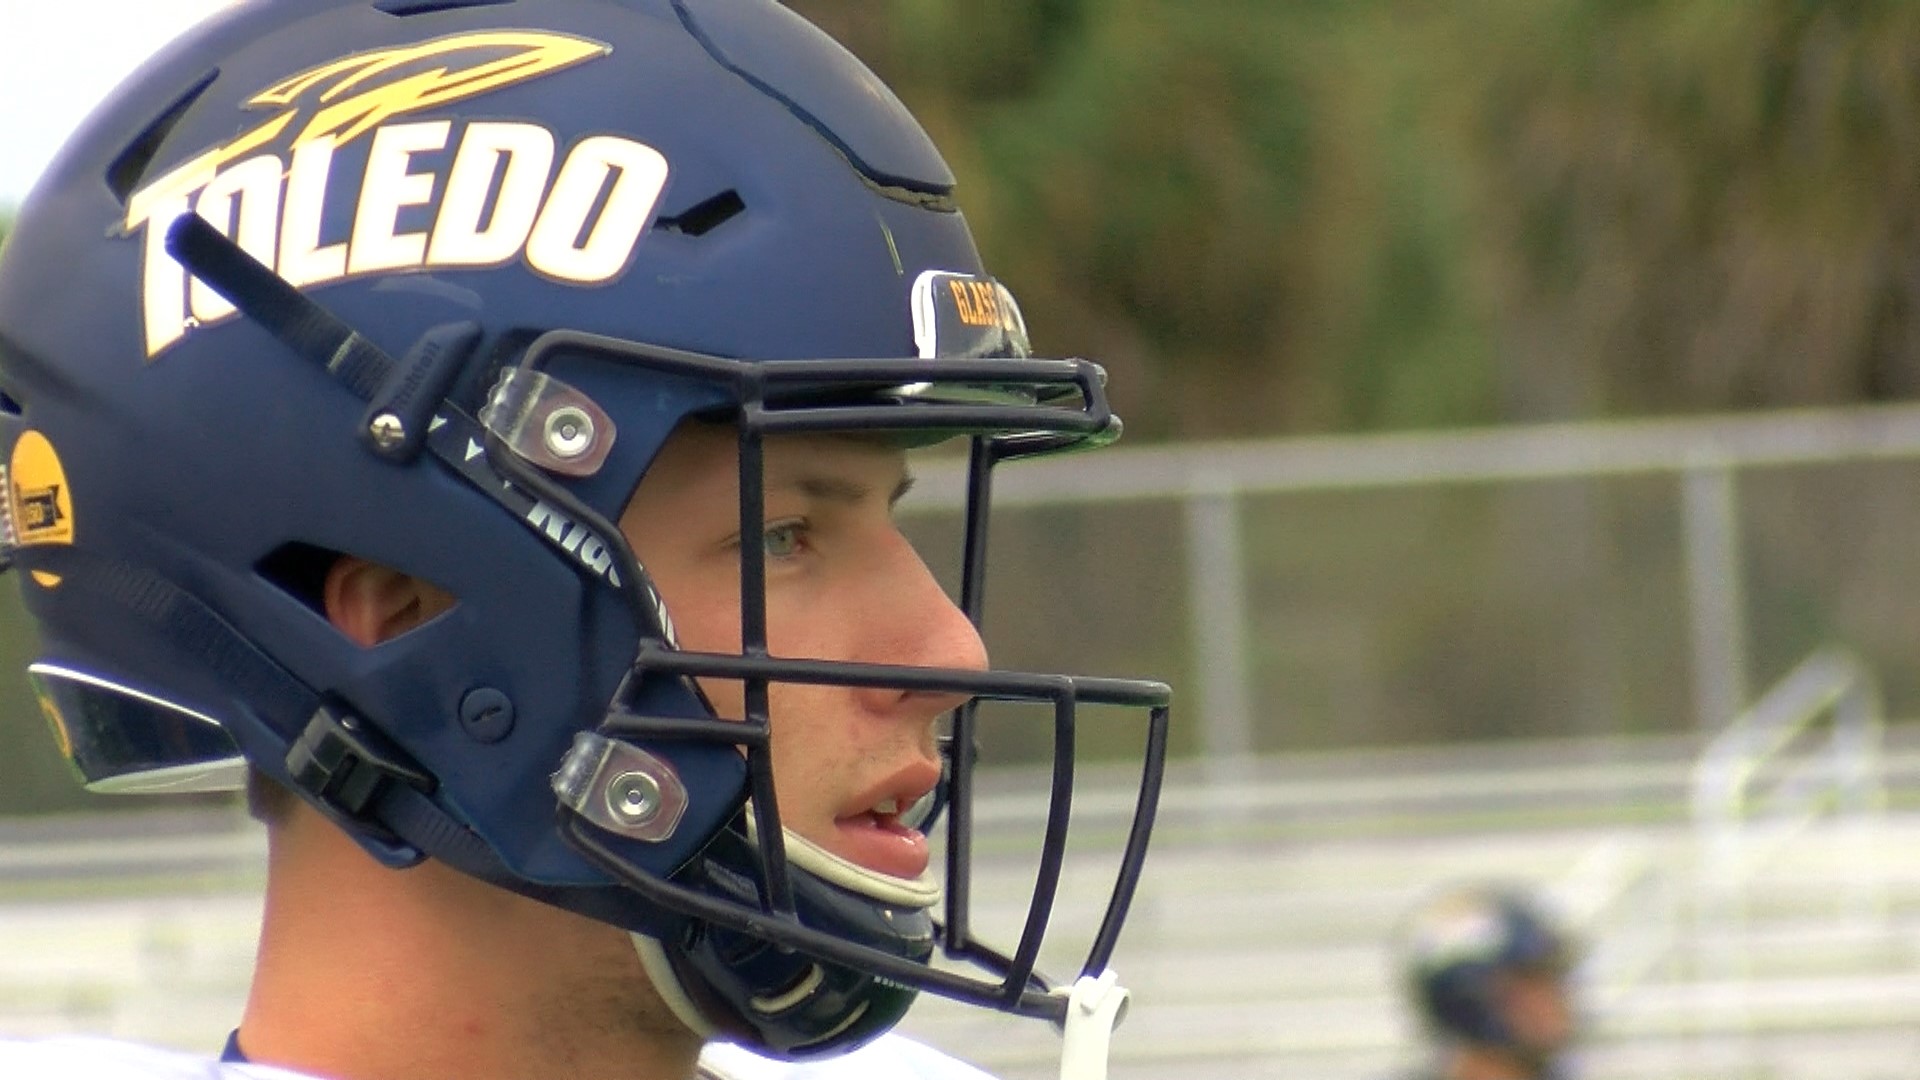 Adam Beale, a former standout for the Blue Devils, worked his way onto the field as a walk-on for Toledo and is making a big impact for the Rockets.